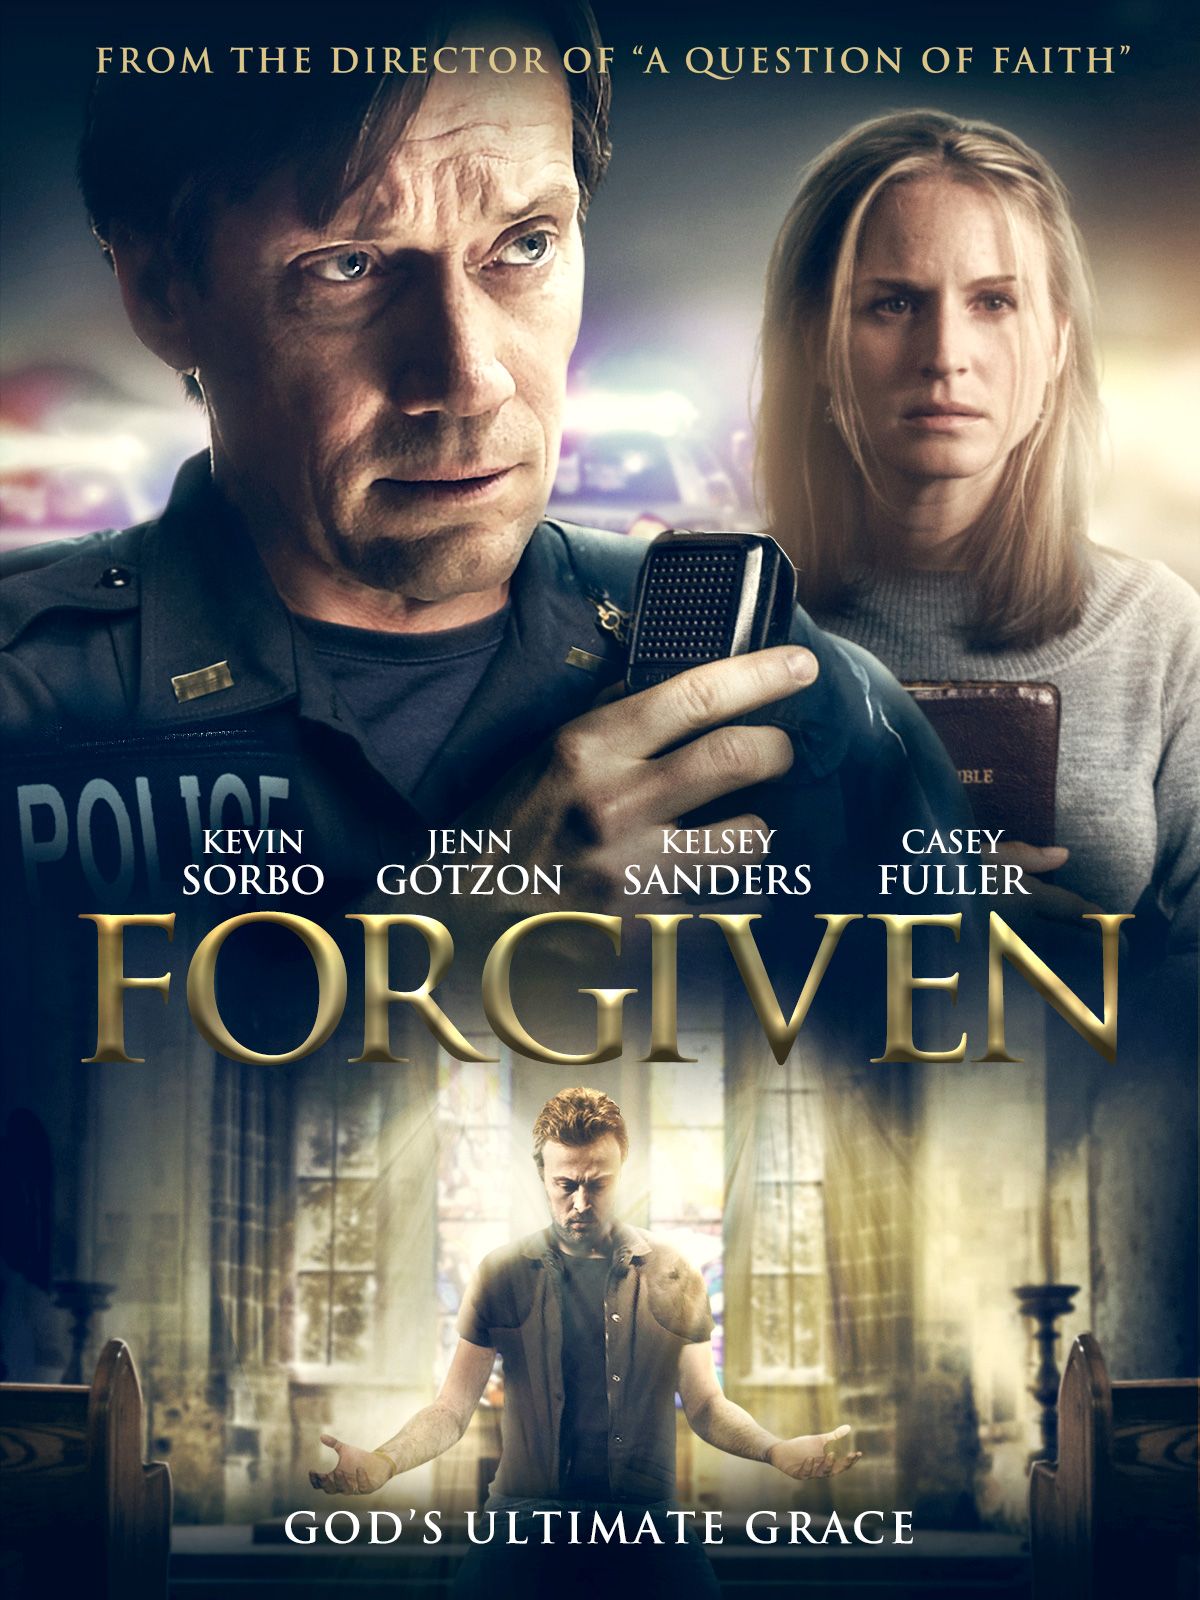 Keyart for the movie Forgiven